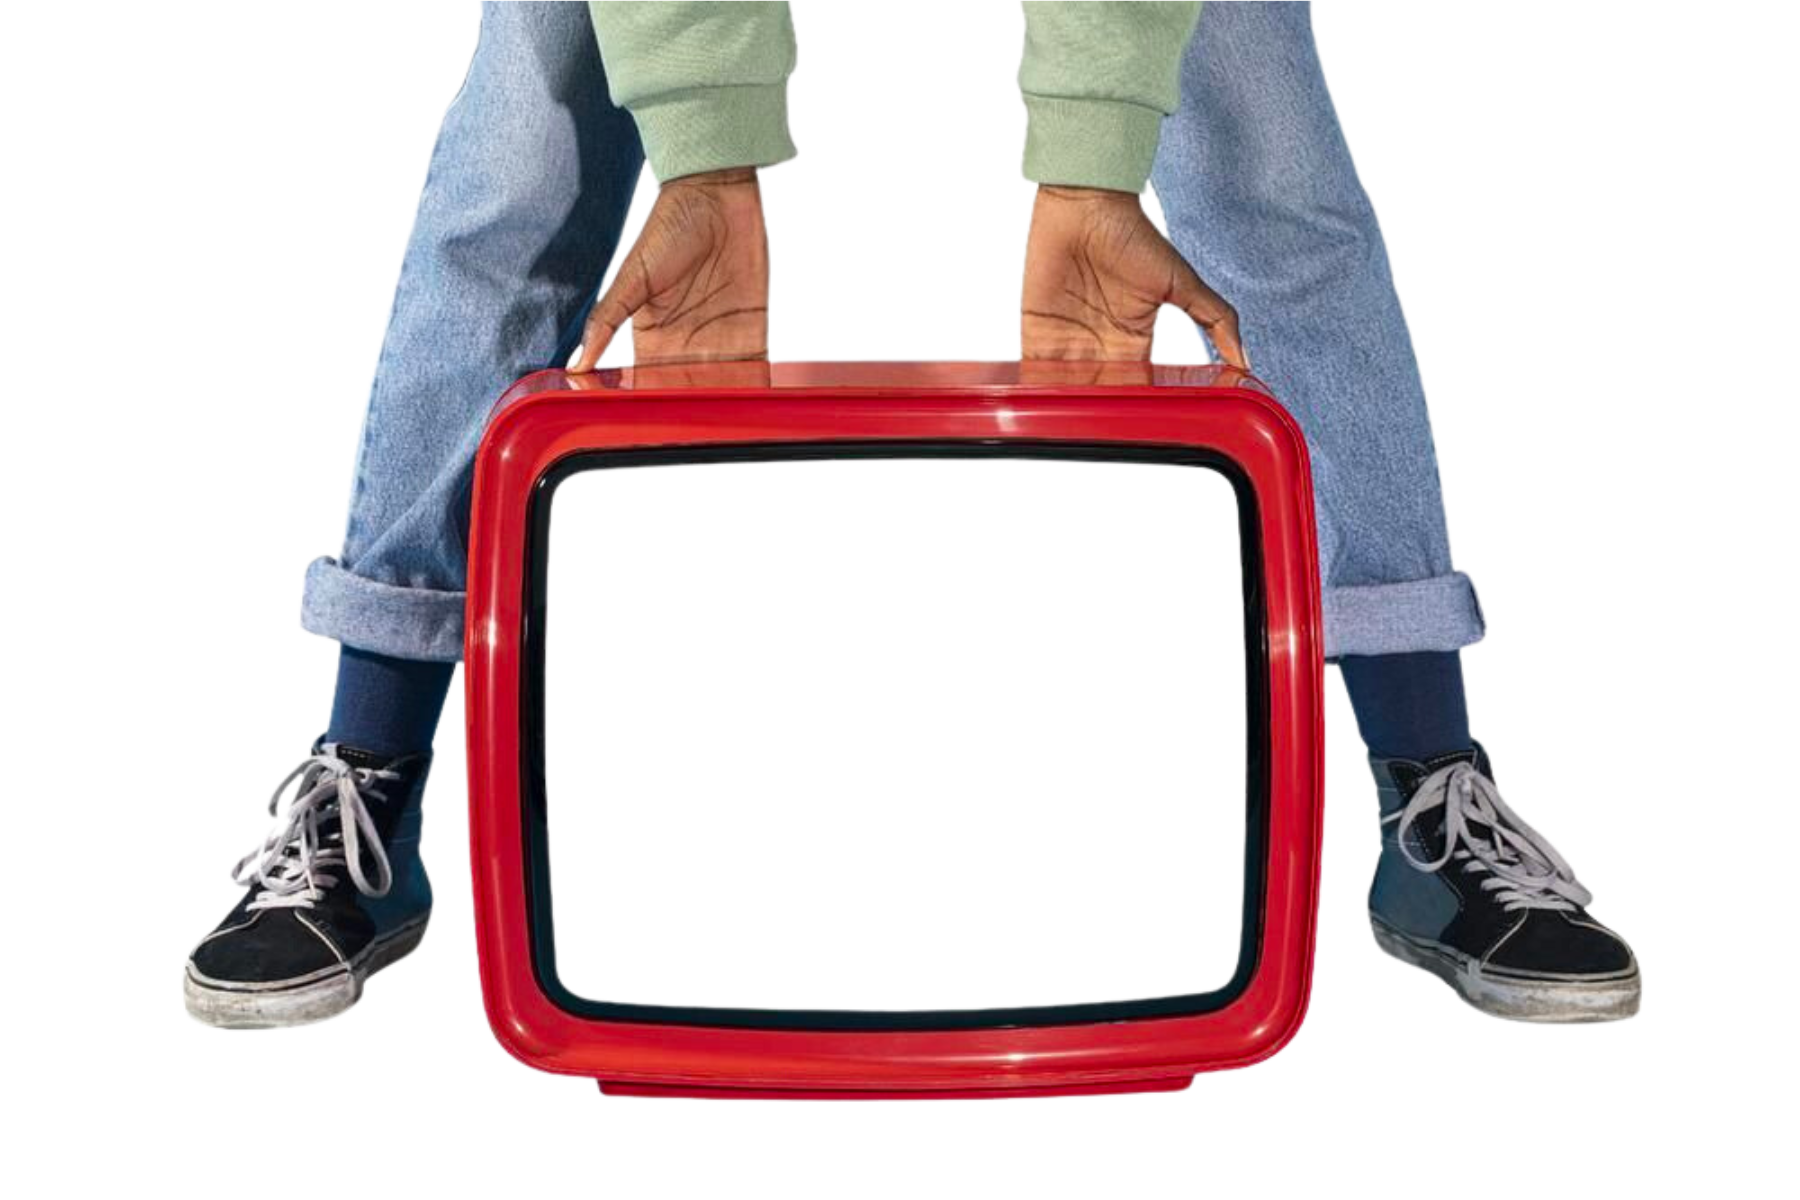 Person holding red television